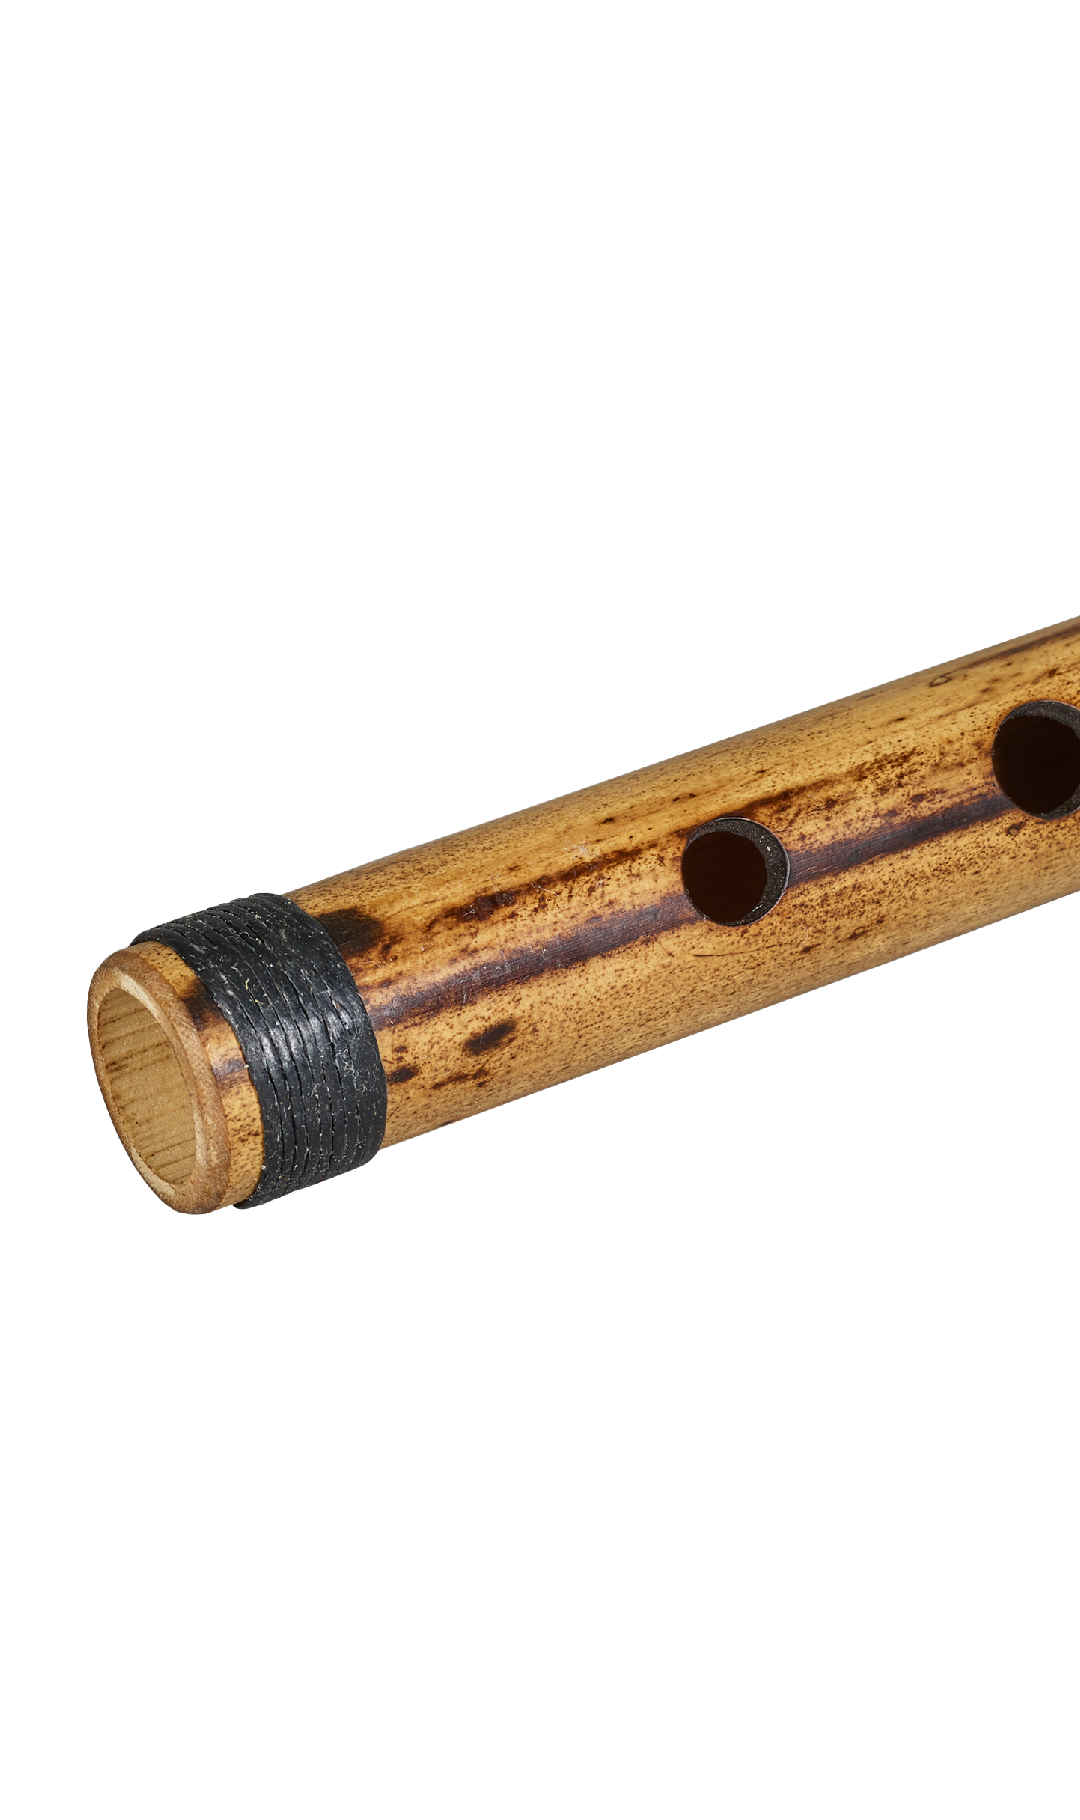 SIDE BLOWN FLUTE Chinese Bamboo Body